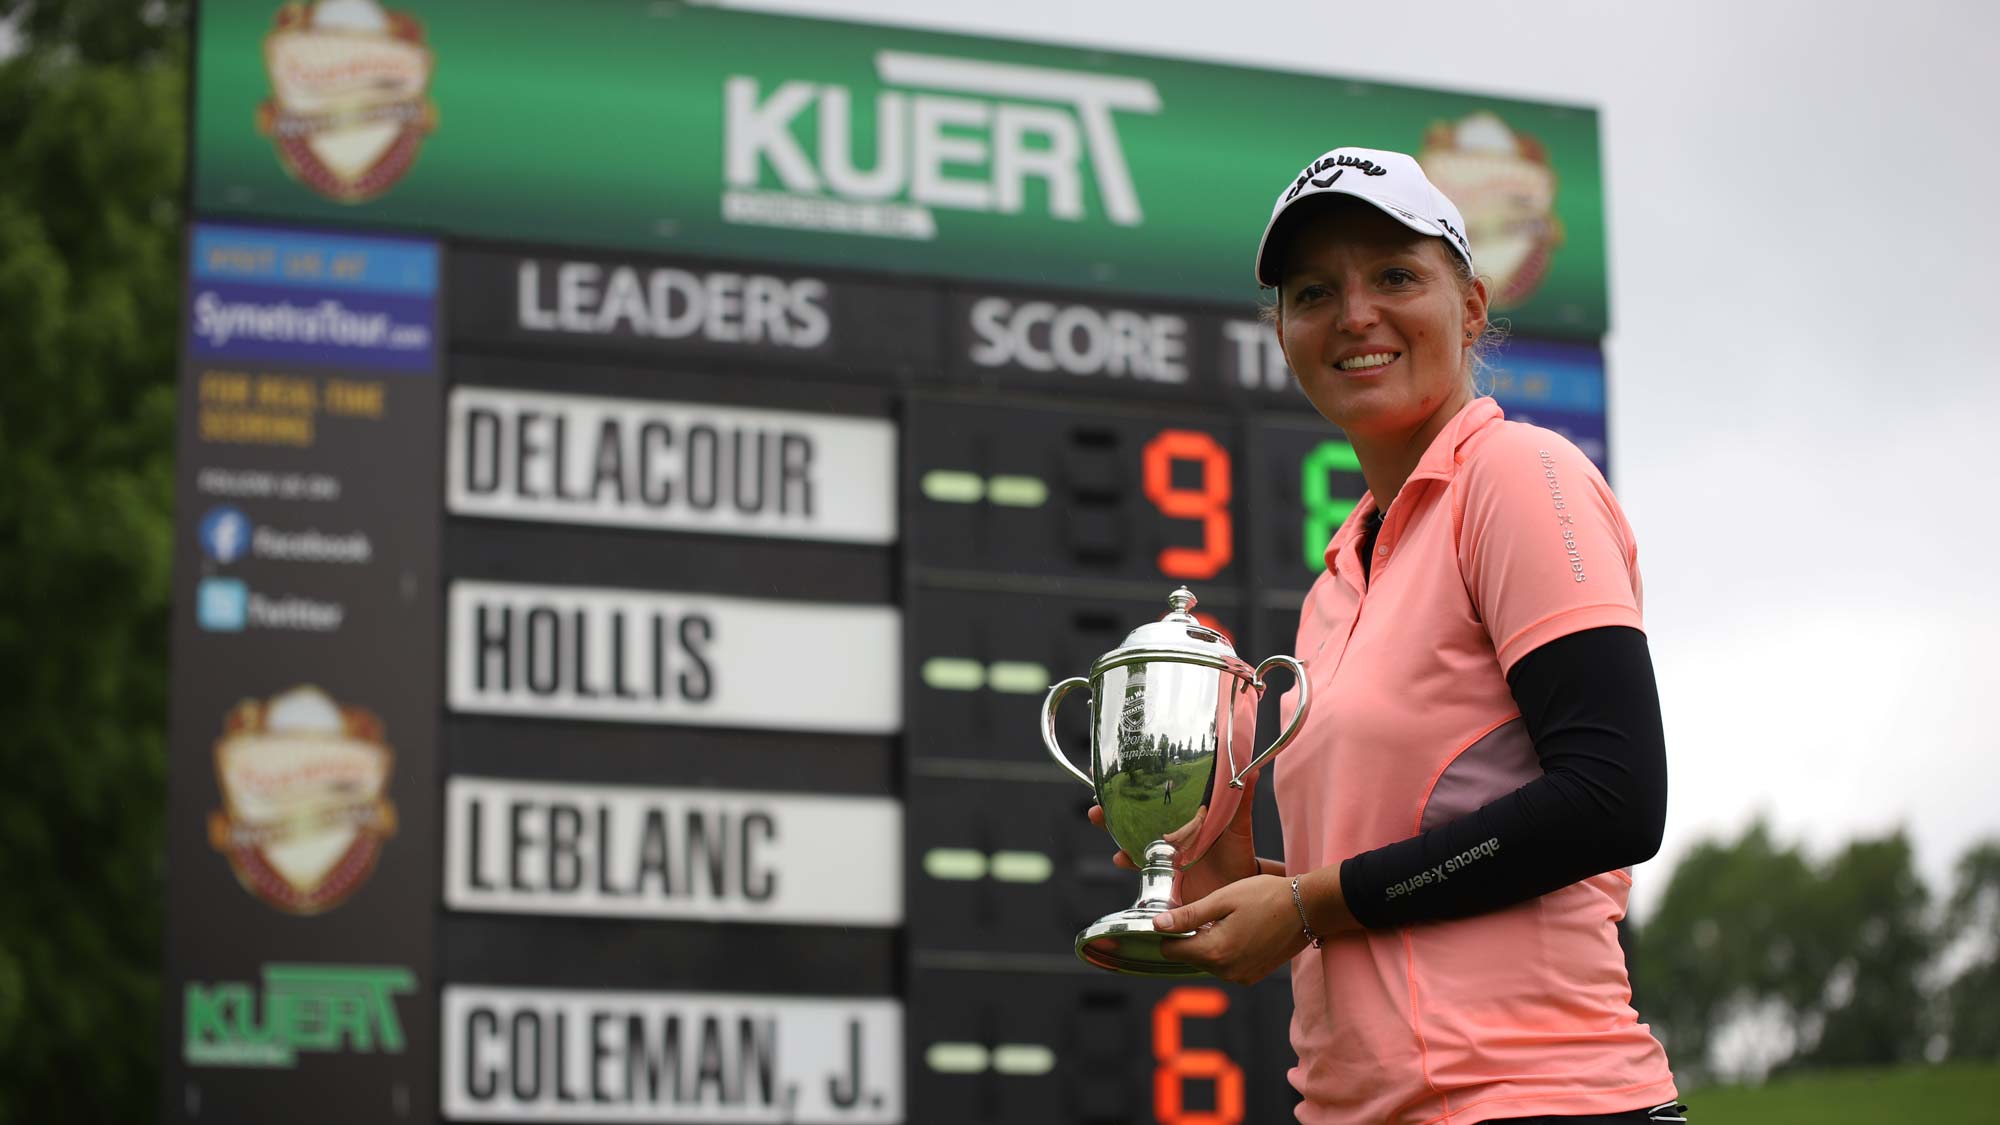 Perrine Delacour with trophy at leaderboard